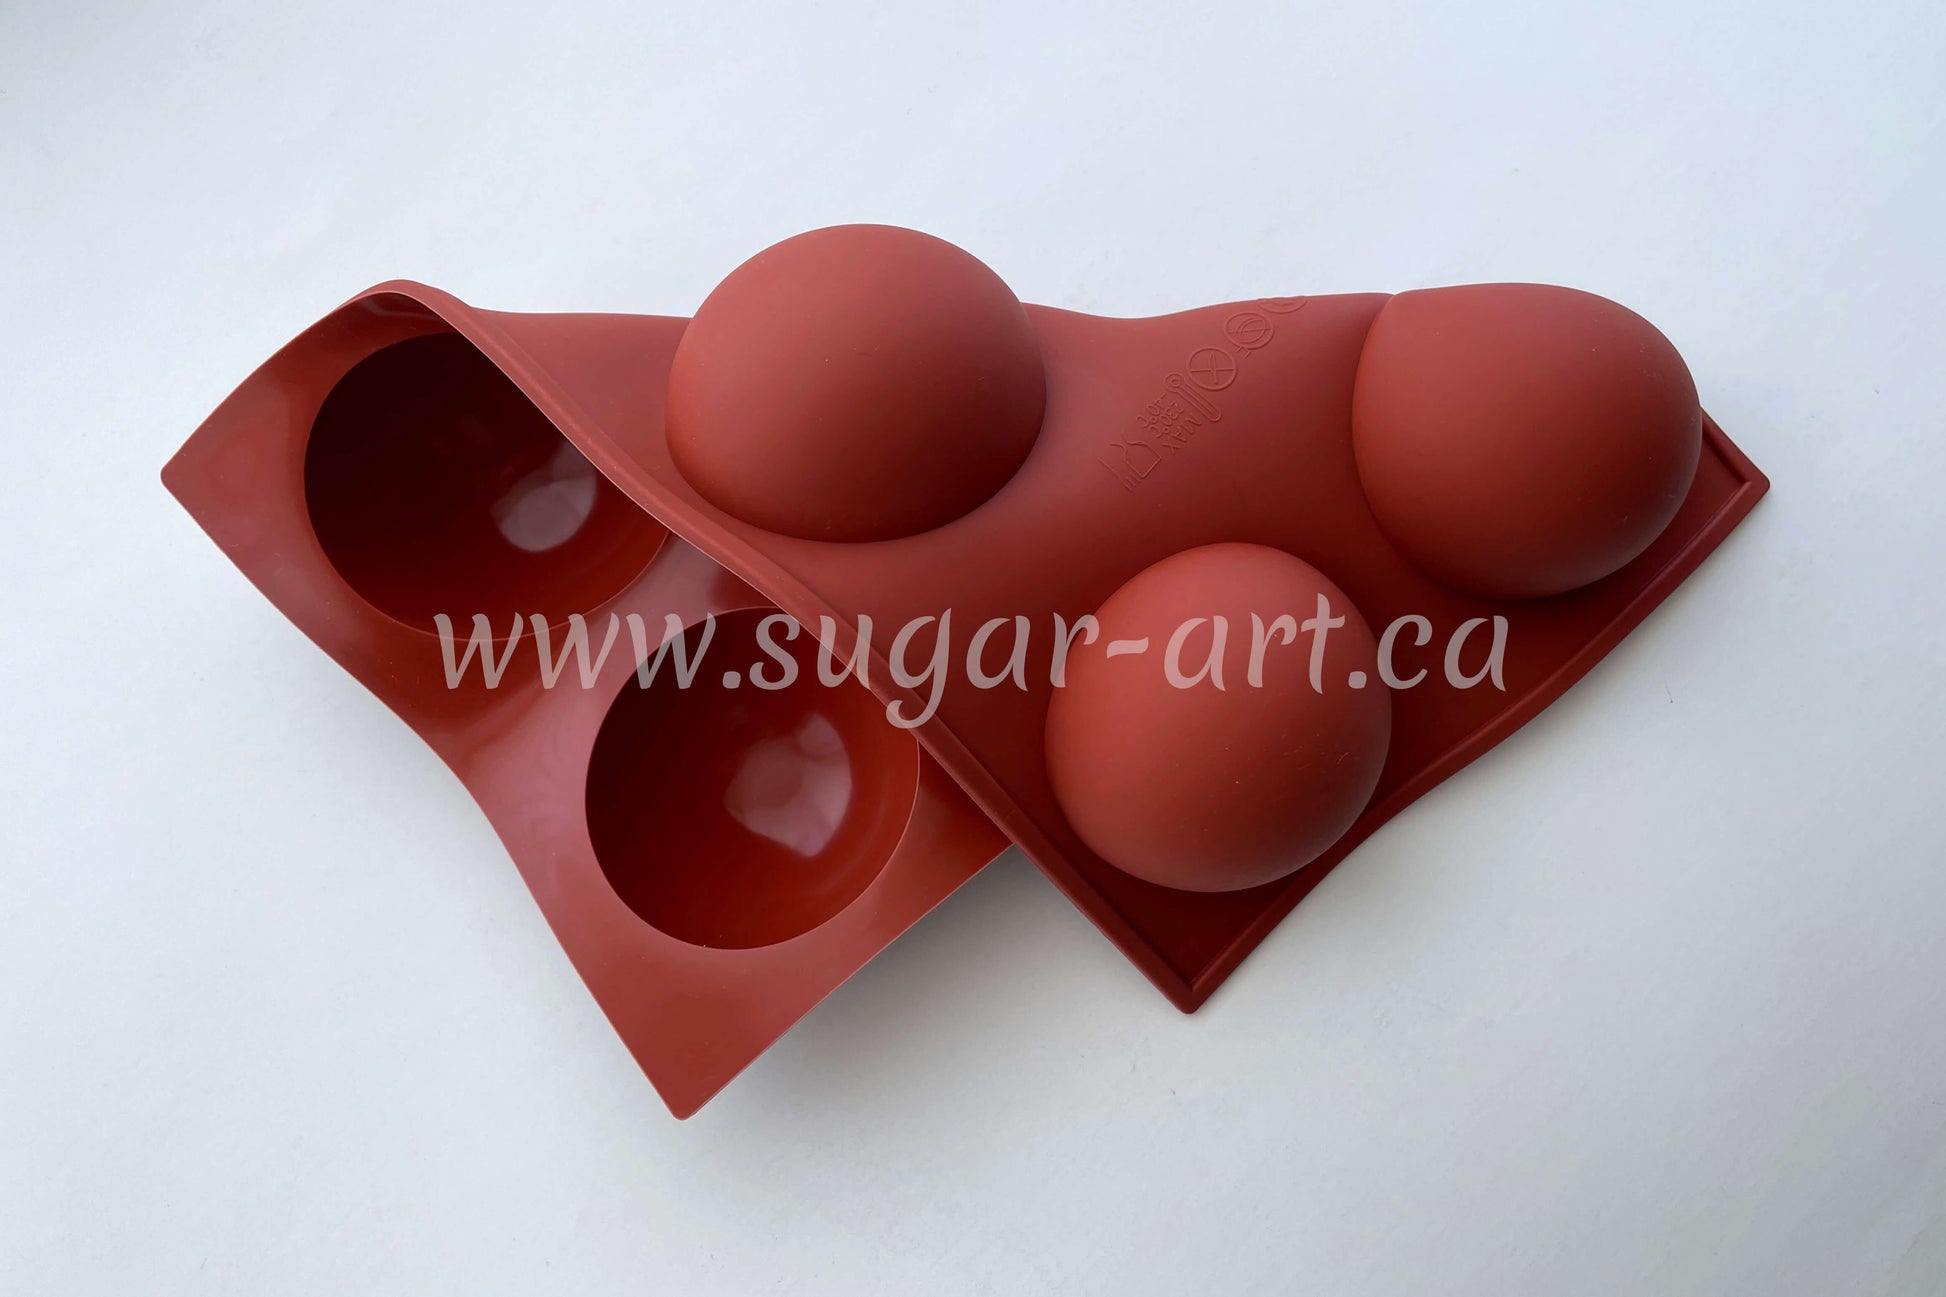 Large Half Sphere Silicone Baking Mold - 6 Cavity 2.75" (7cm) each - BSUPP020.